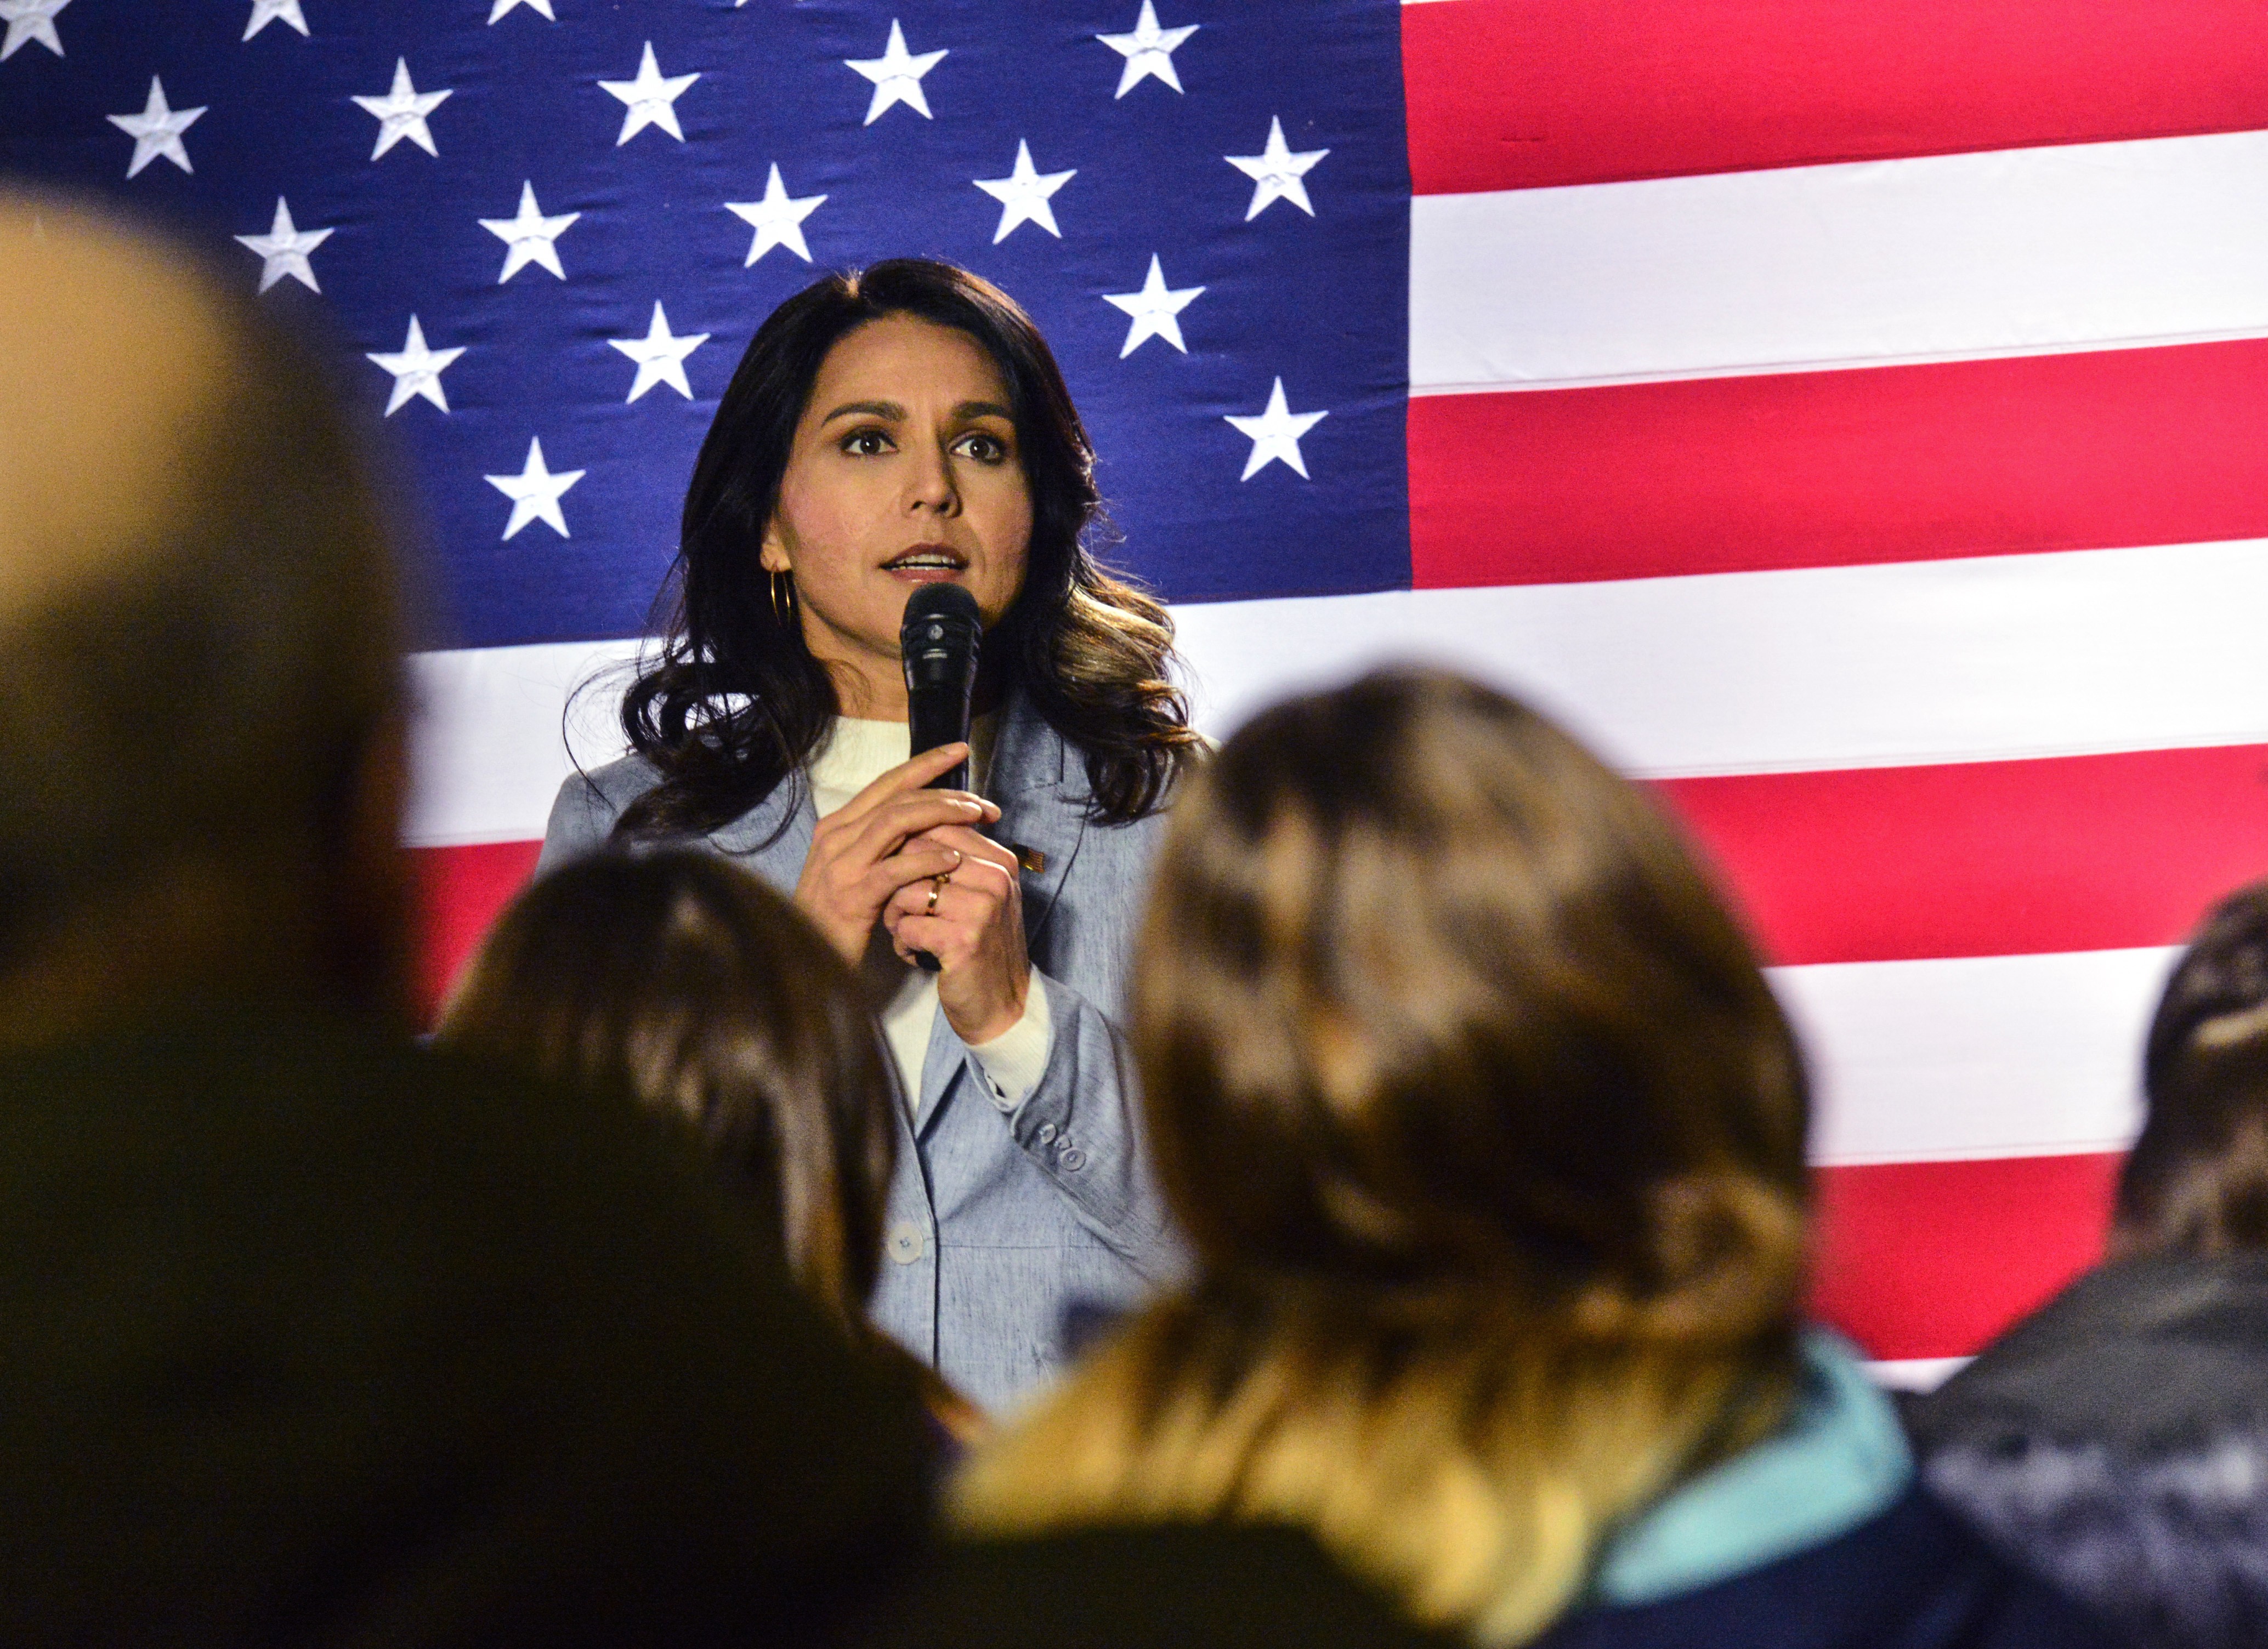 Democratic presidential candidate Tulsi Gabbard hosts a town hall meeting in Keene, New Hampshire, on Tuesday. Photo: The Brattleboro Reformer via AP